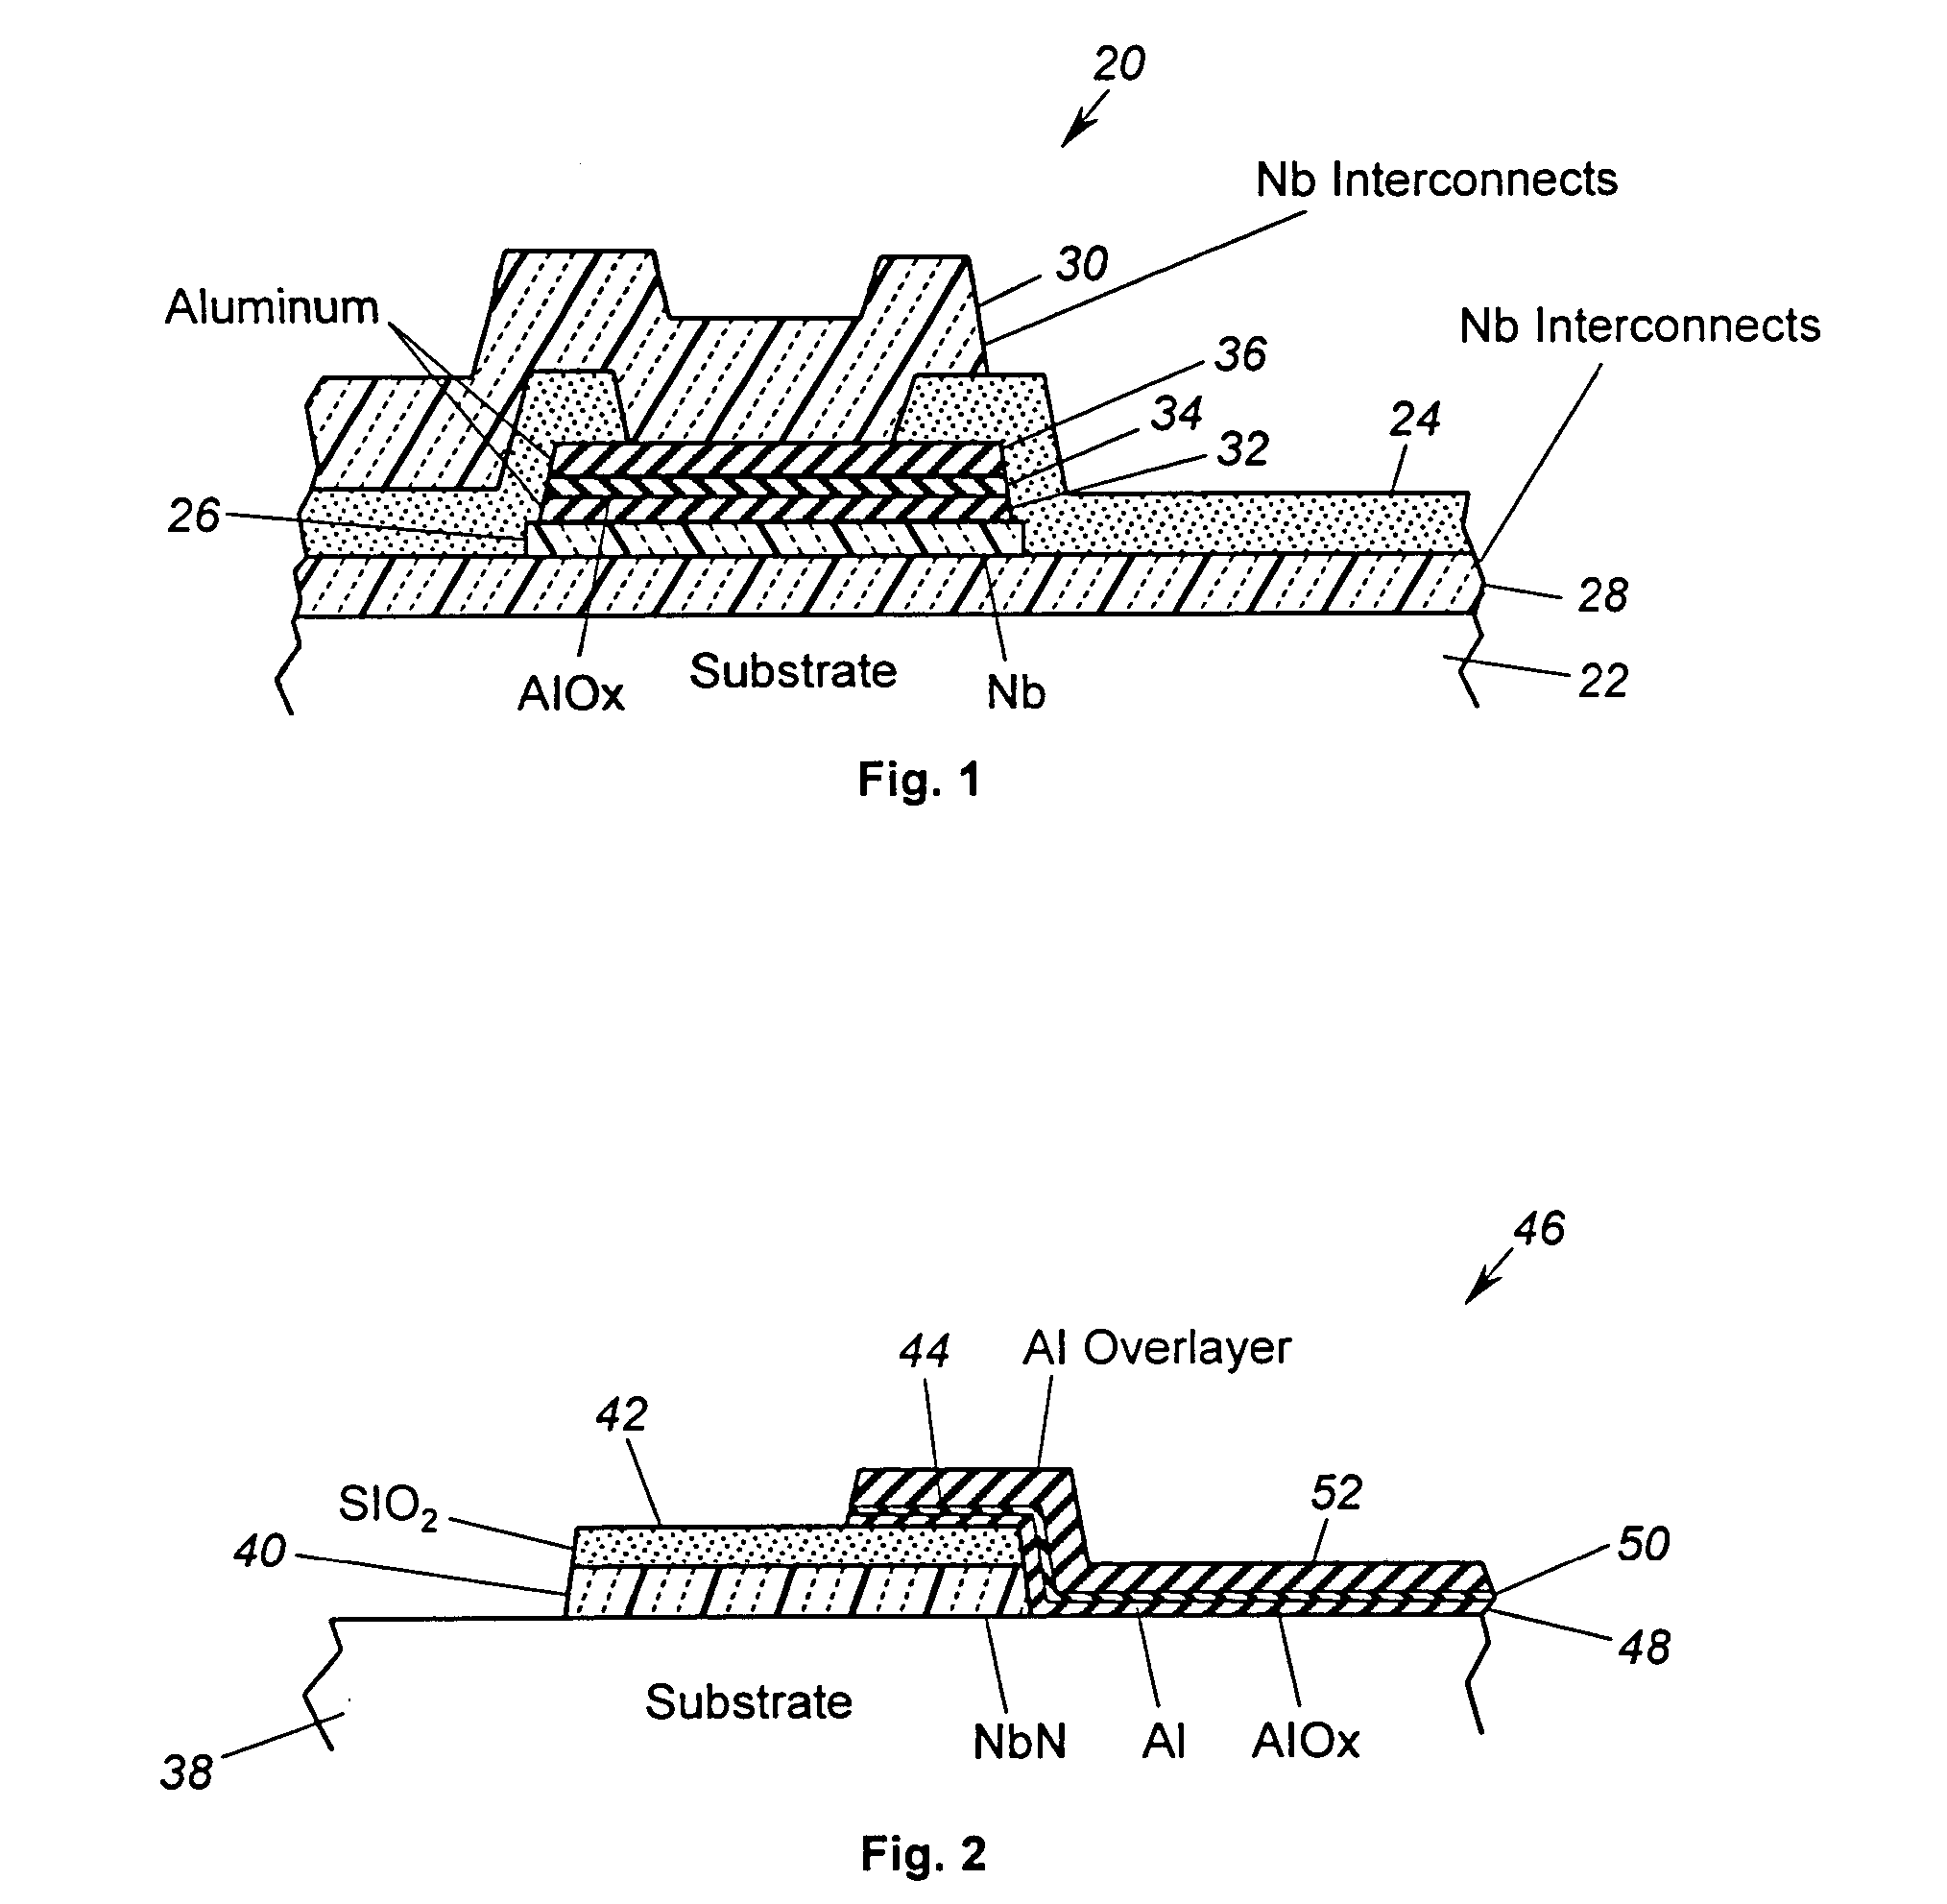 A1/A1Ox/A1 resistor process for integrated circuits